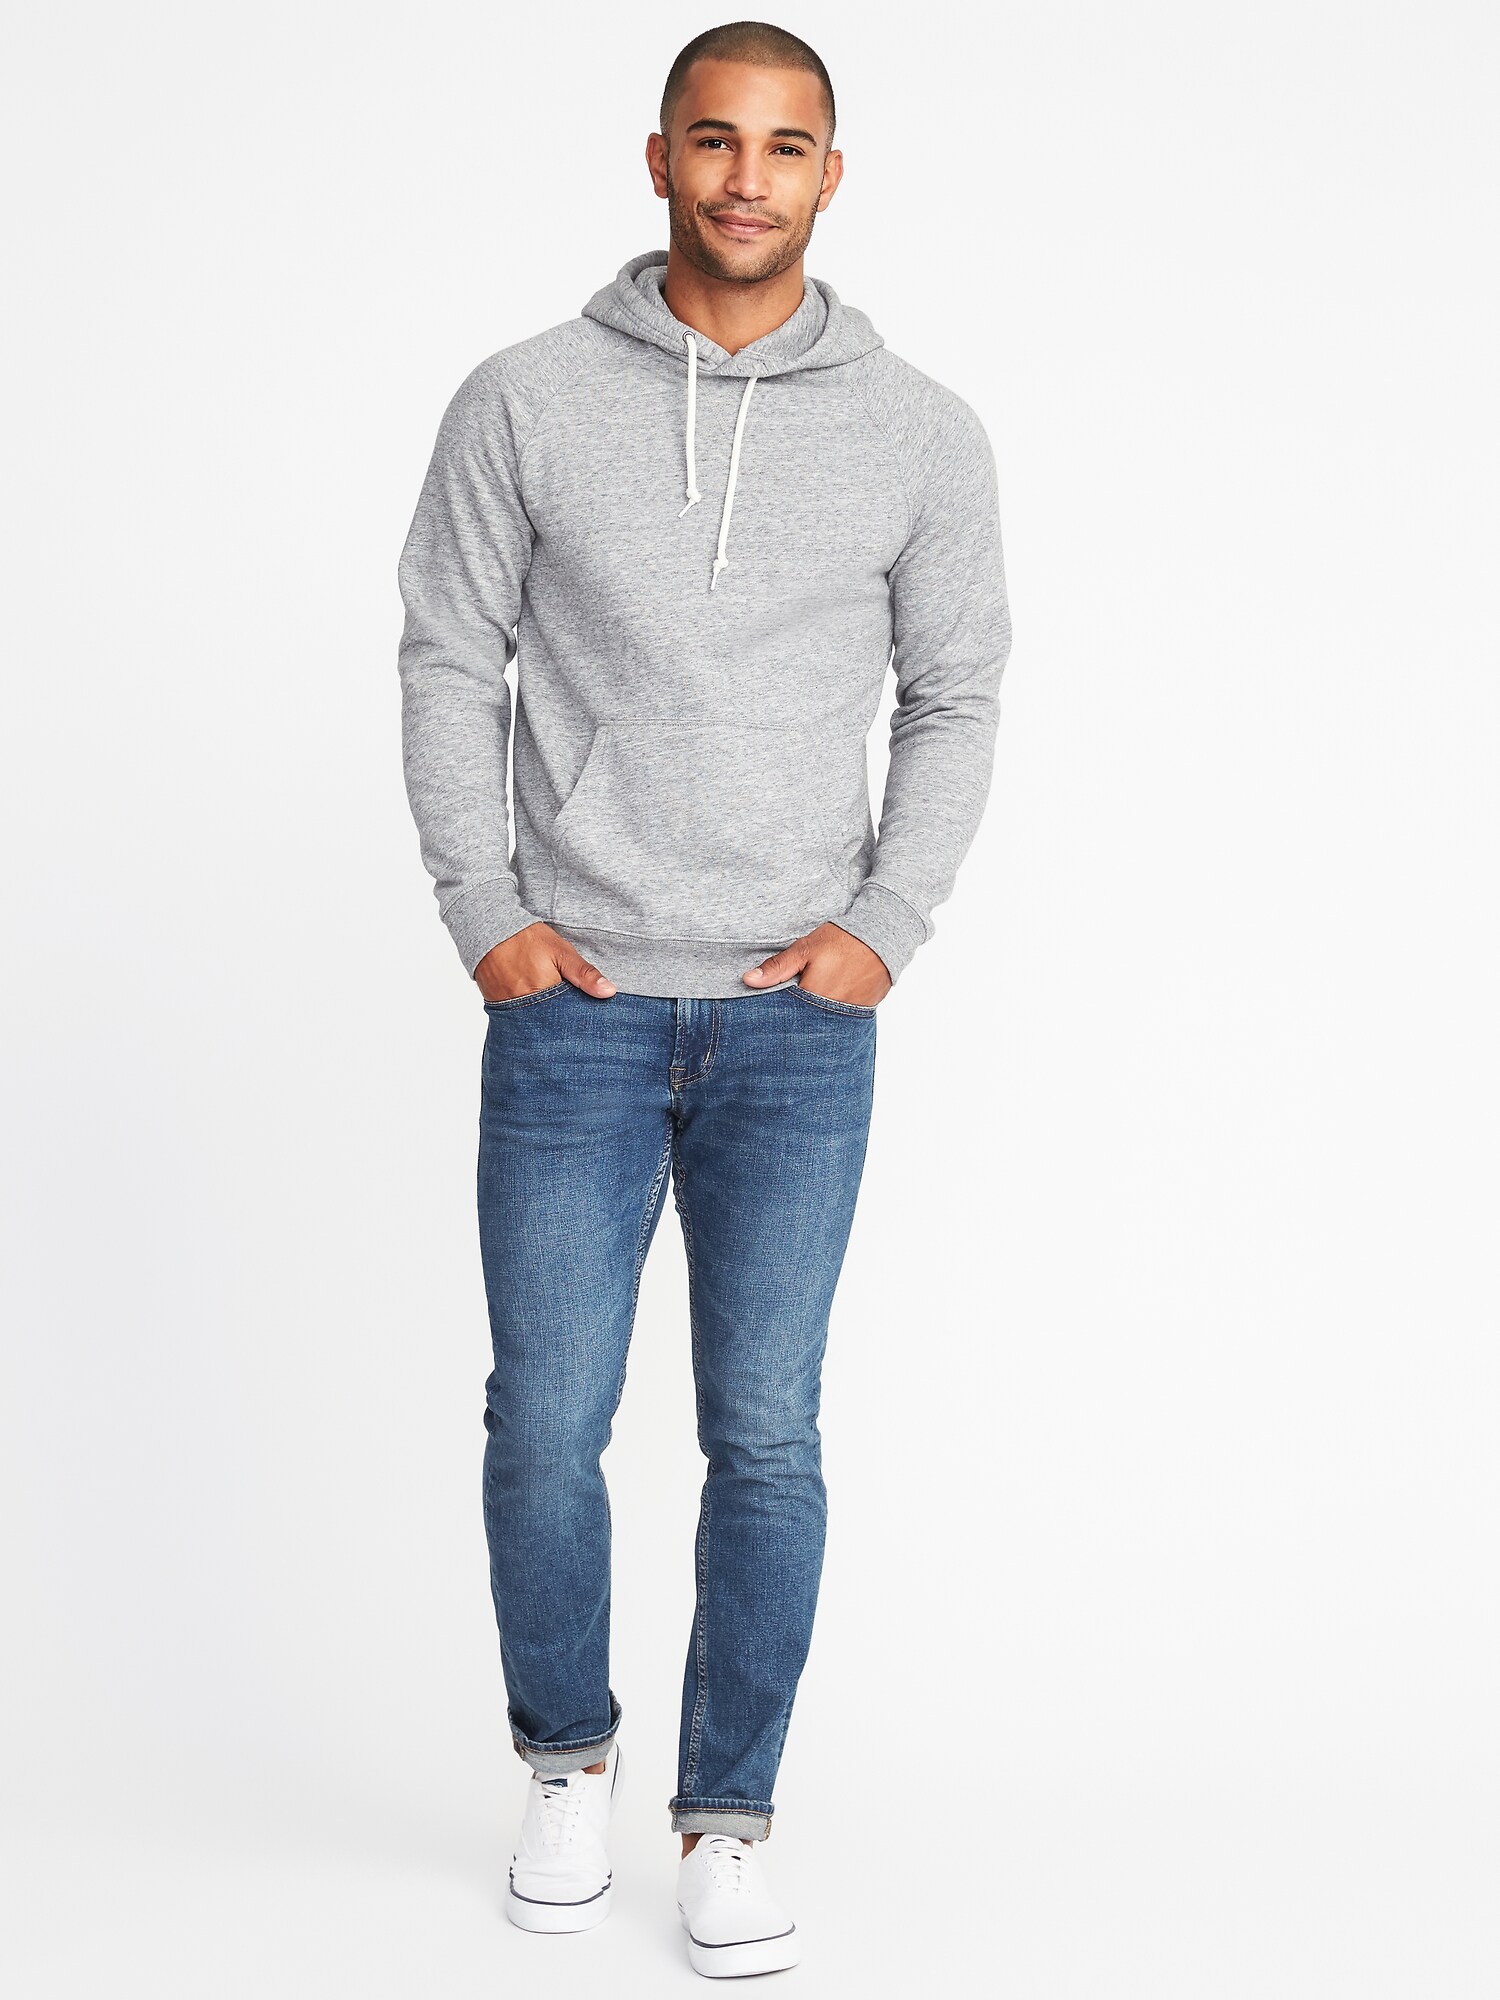 Classic Gender-Neutral Pullover Hoodie for Adults | Old Navy